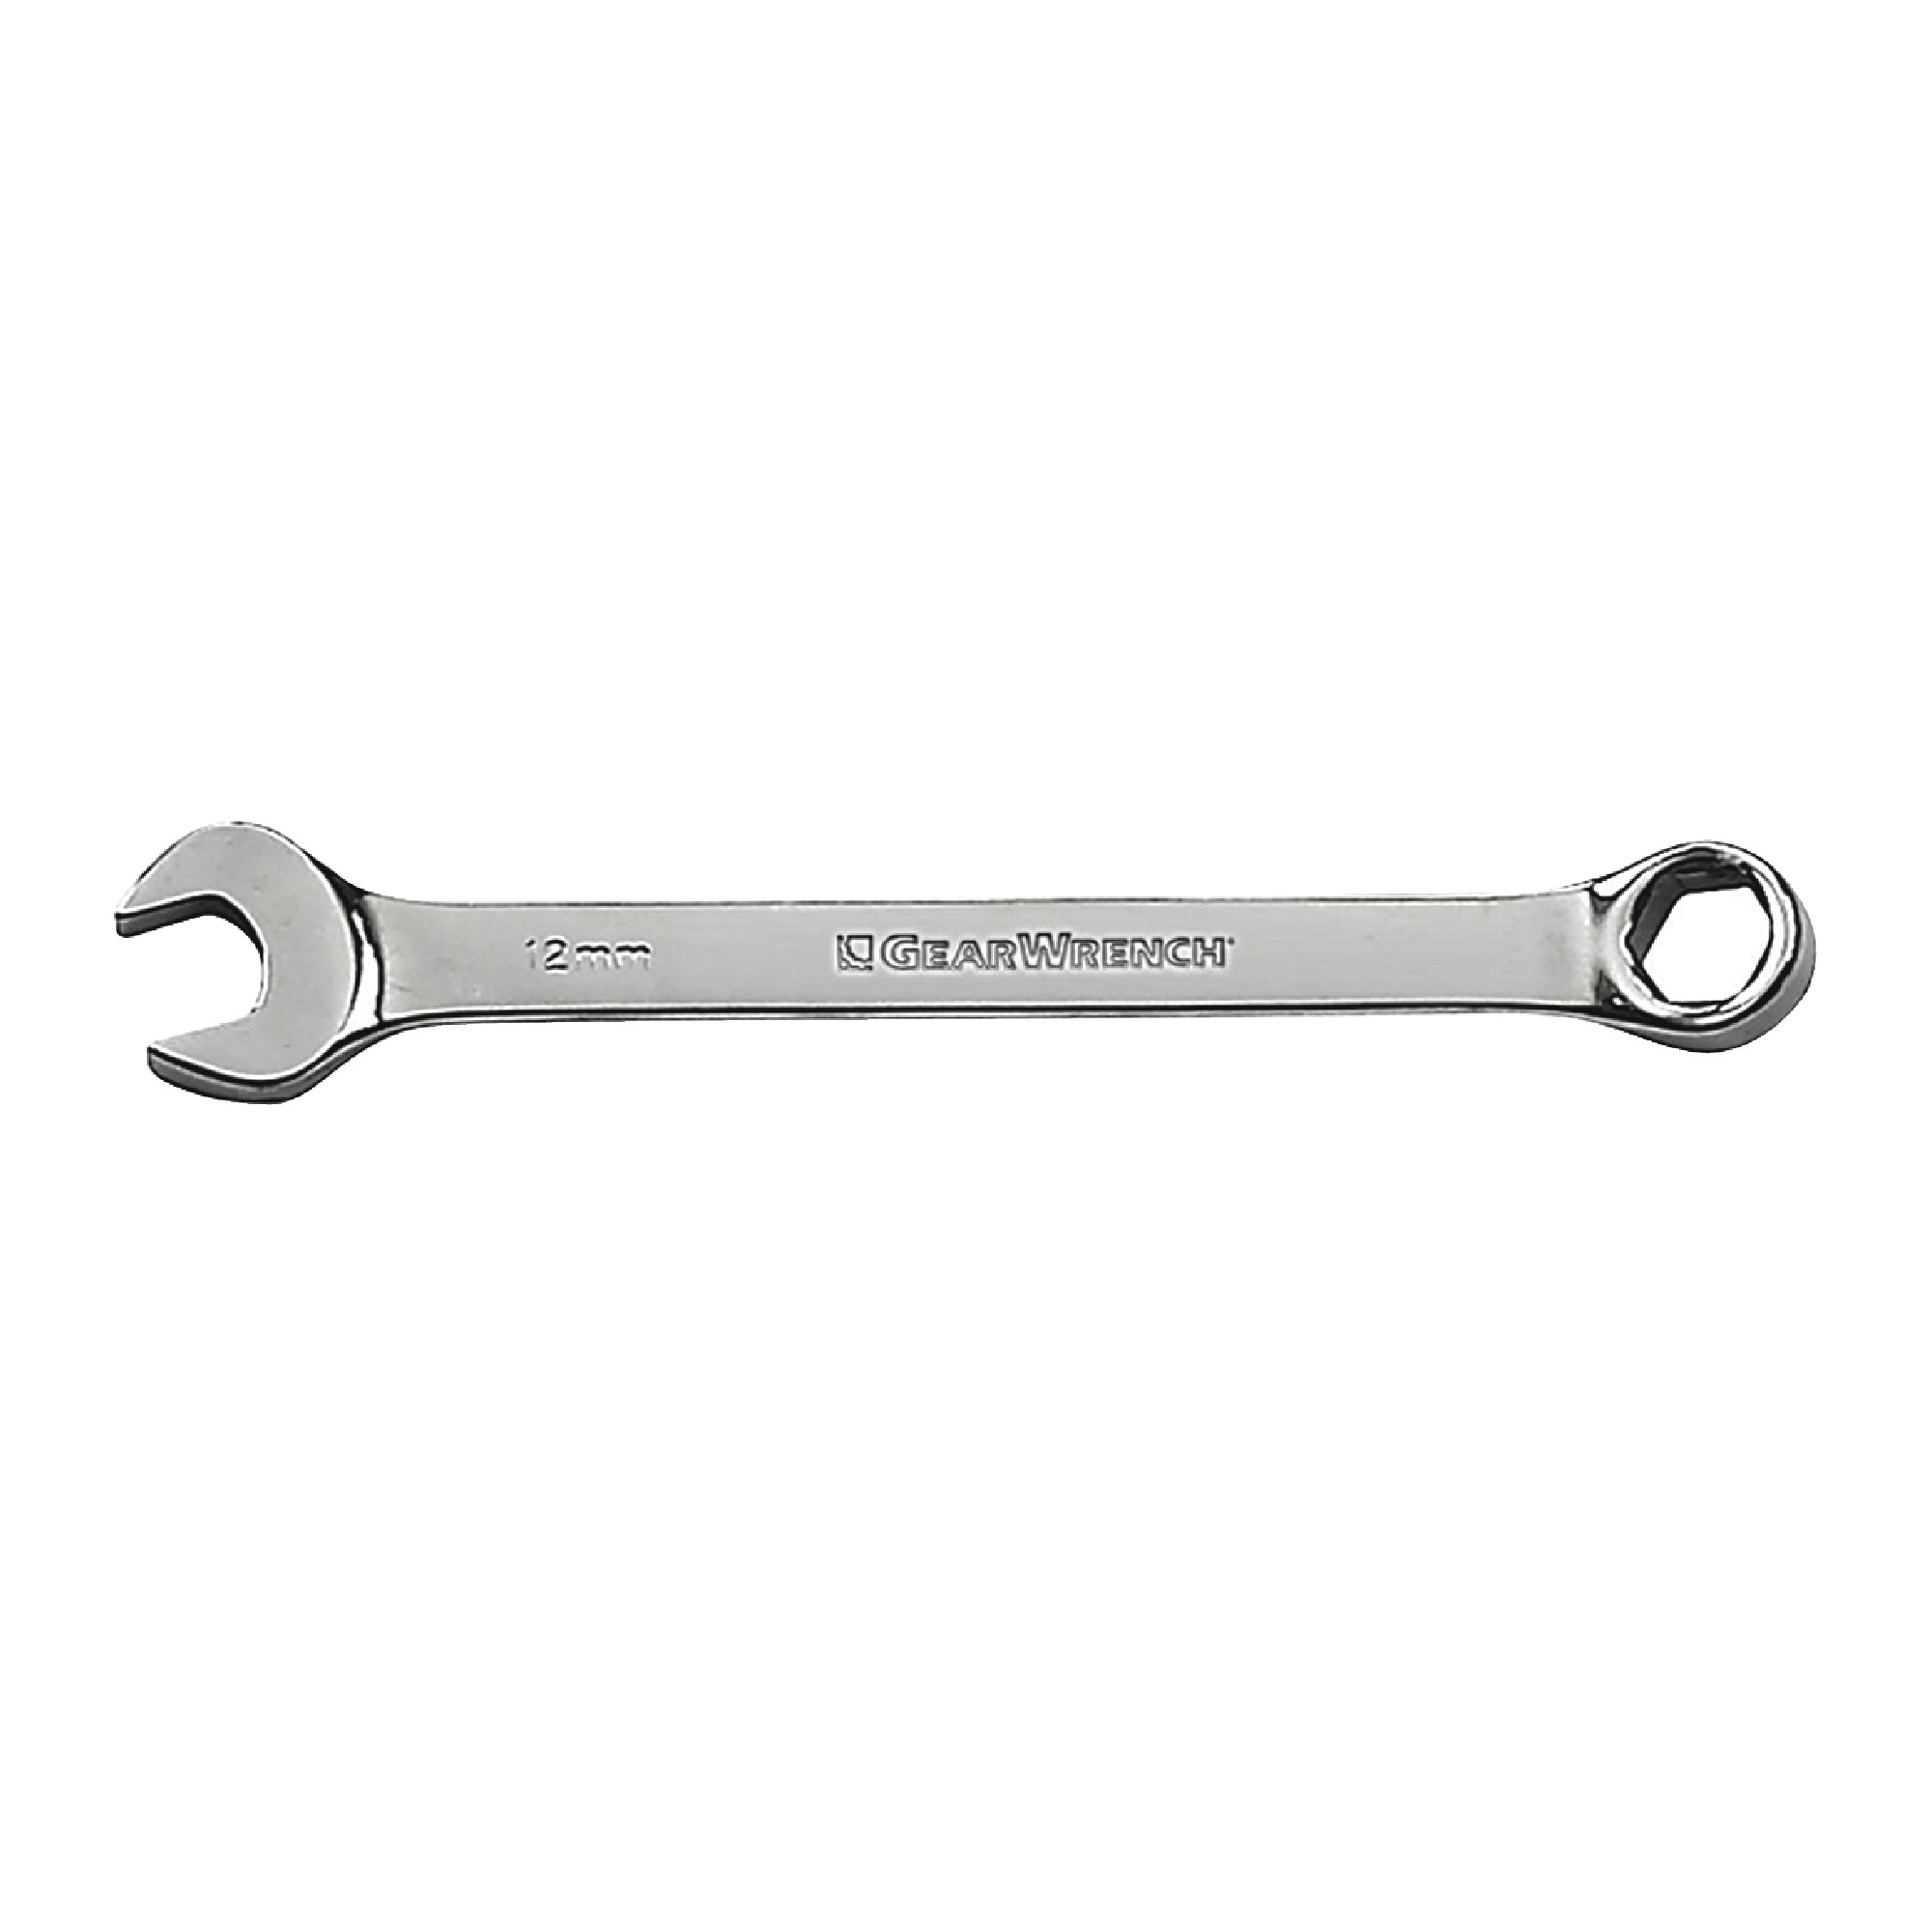 12mm 6 Point Combination Wrench